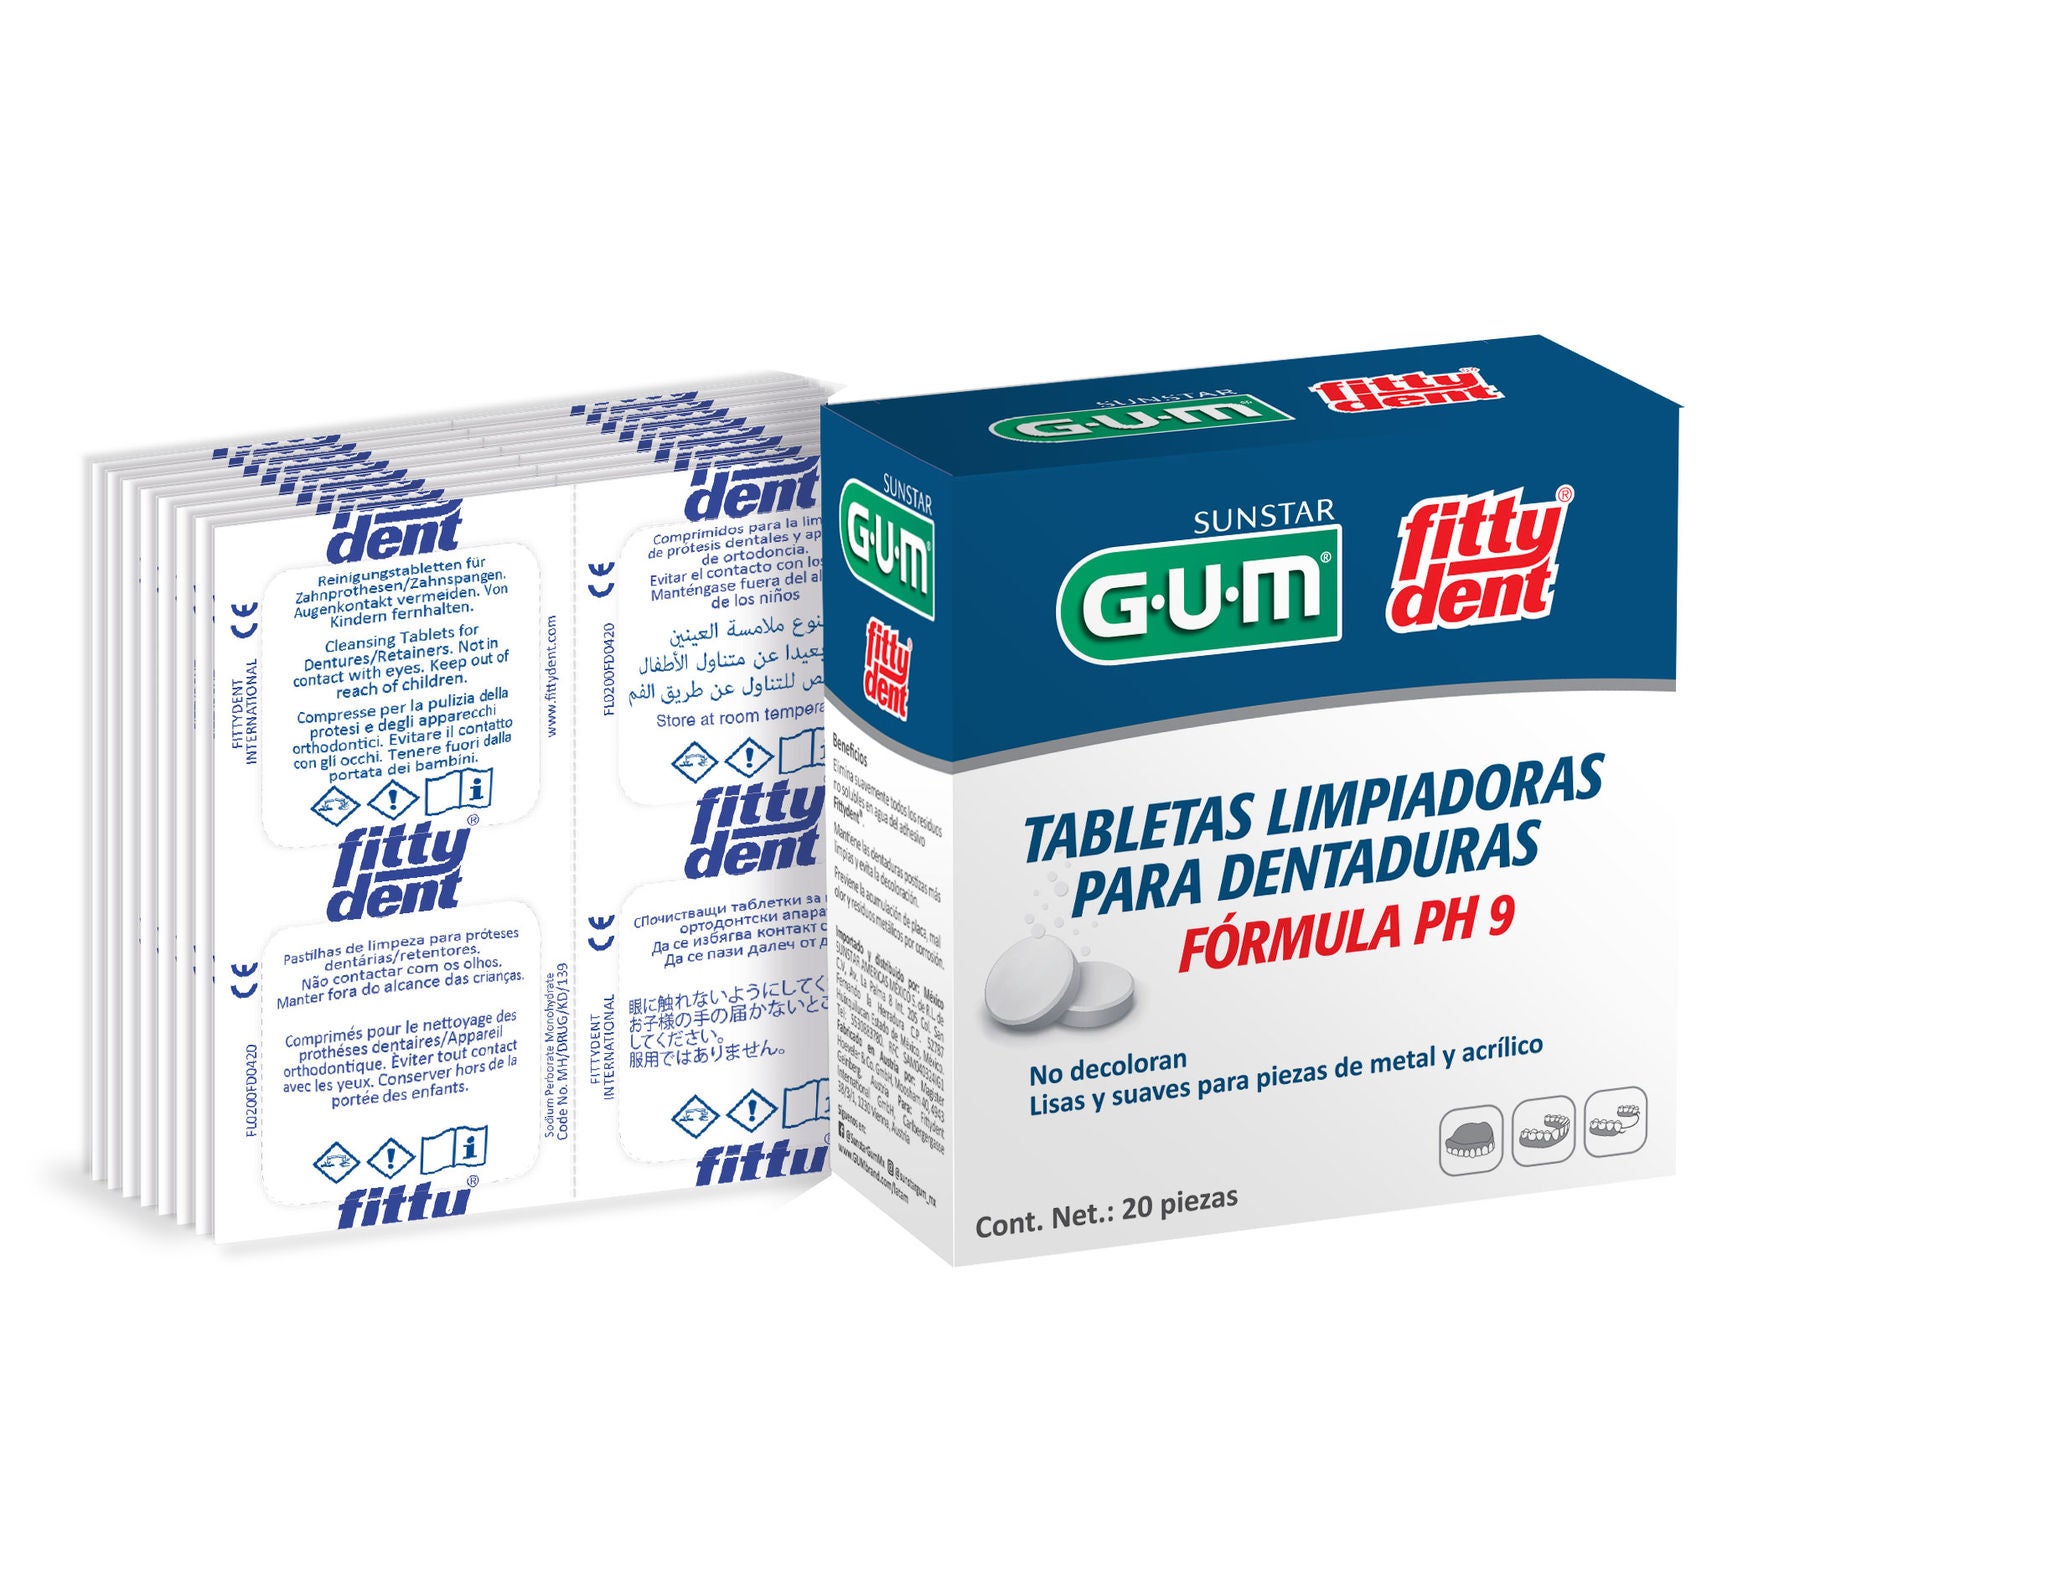 835LA-Product-Packaging-DentureCare-Fittydent-Tablets-20ct-front.jpg